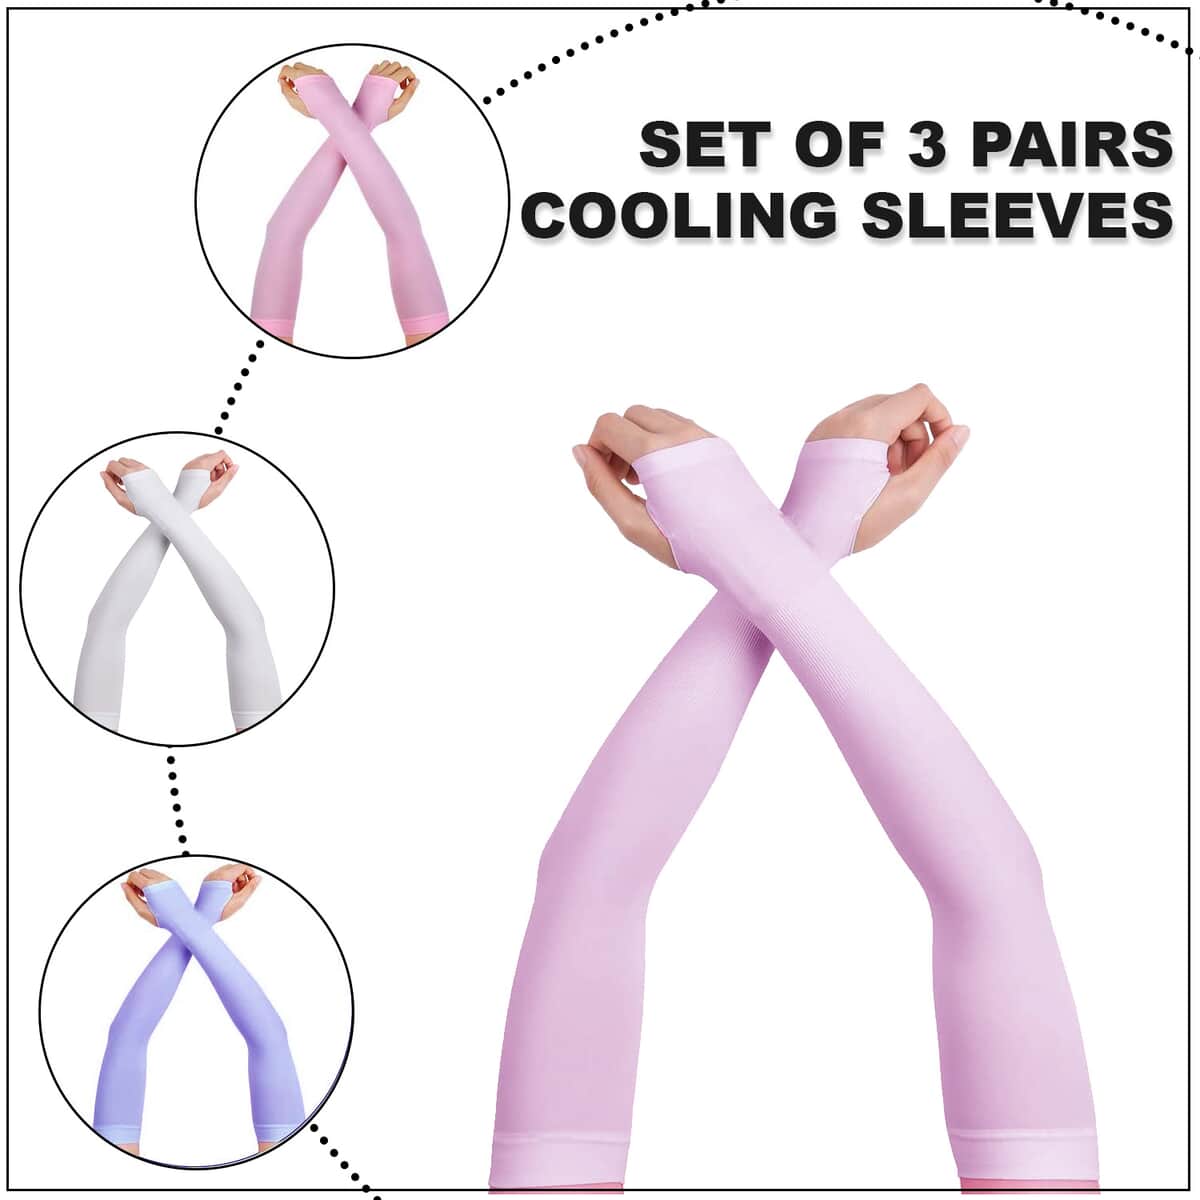 HOMESMART Set of 3 Pairs White, Lilac and Pink Cooling Sleeves (90% Polyamide and 10% Spandex) image number 1